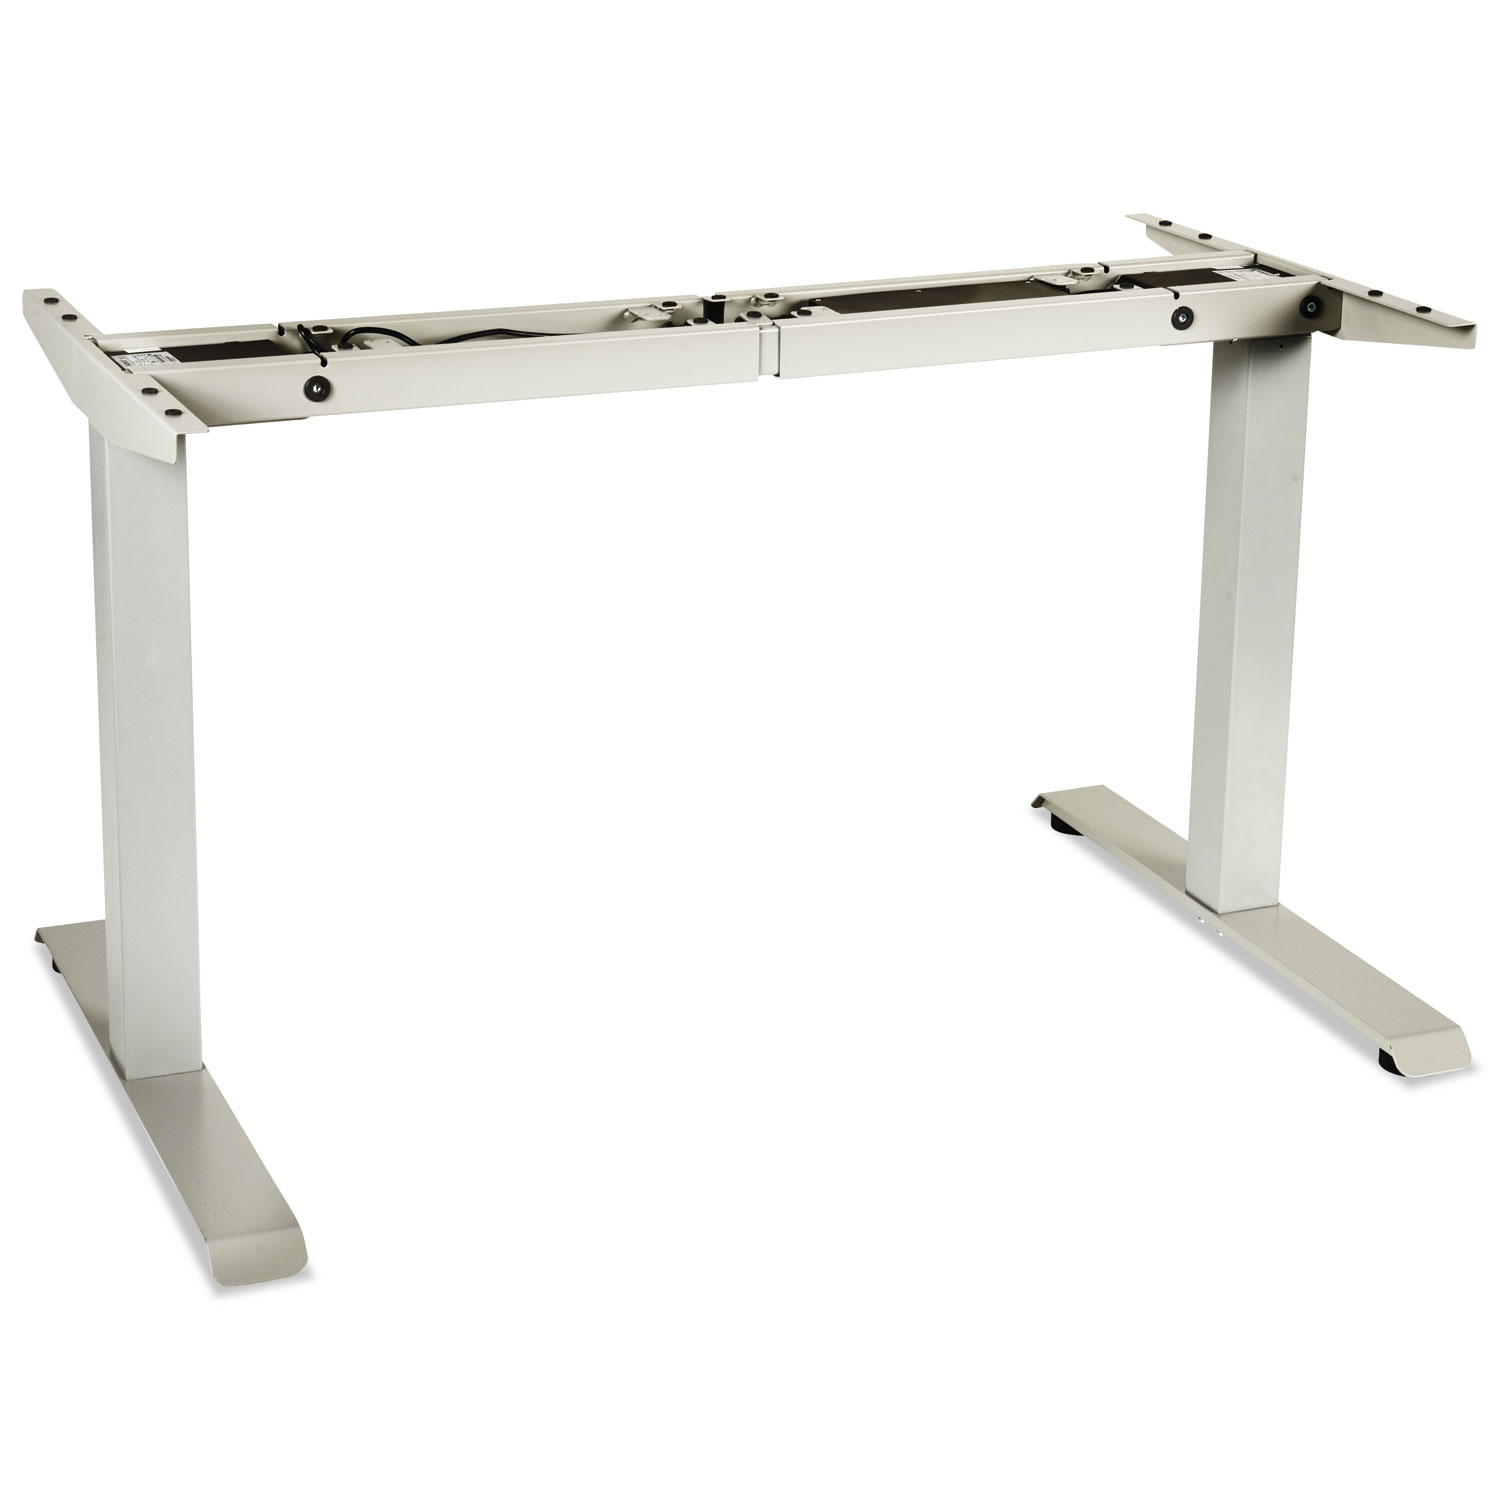 2-Stage Electric Adjustable Table Base, 27 1/2